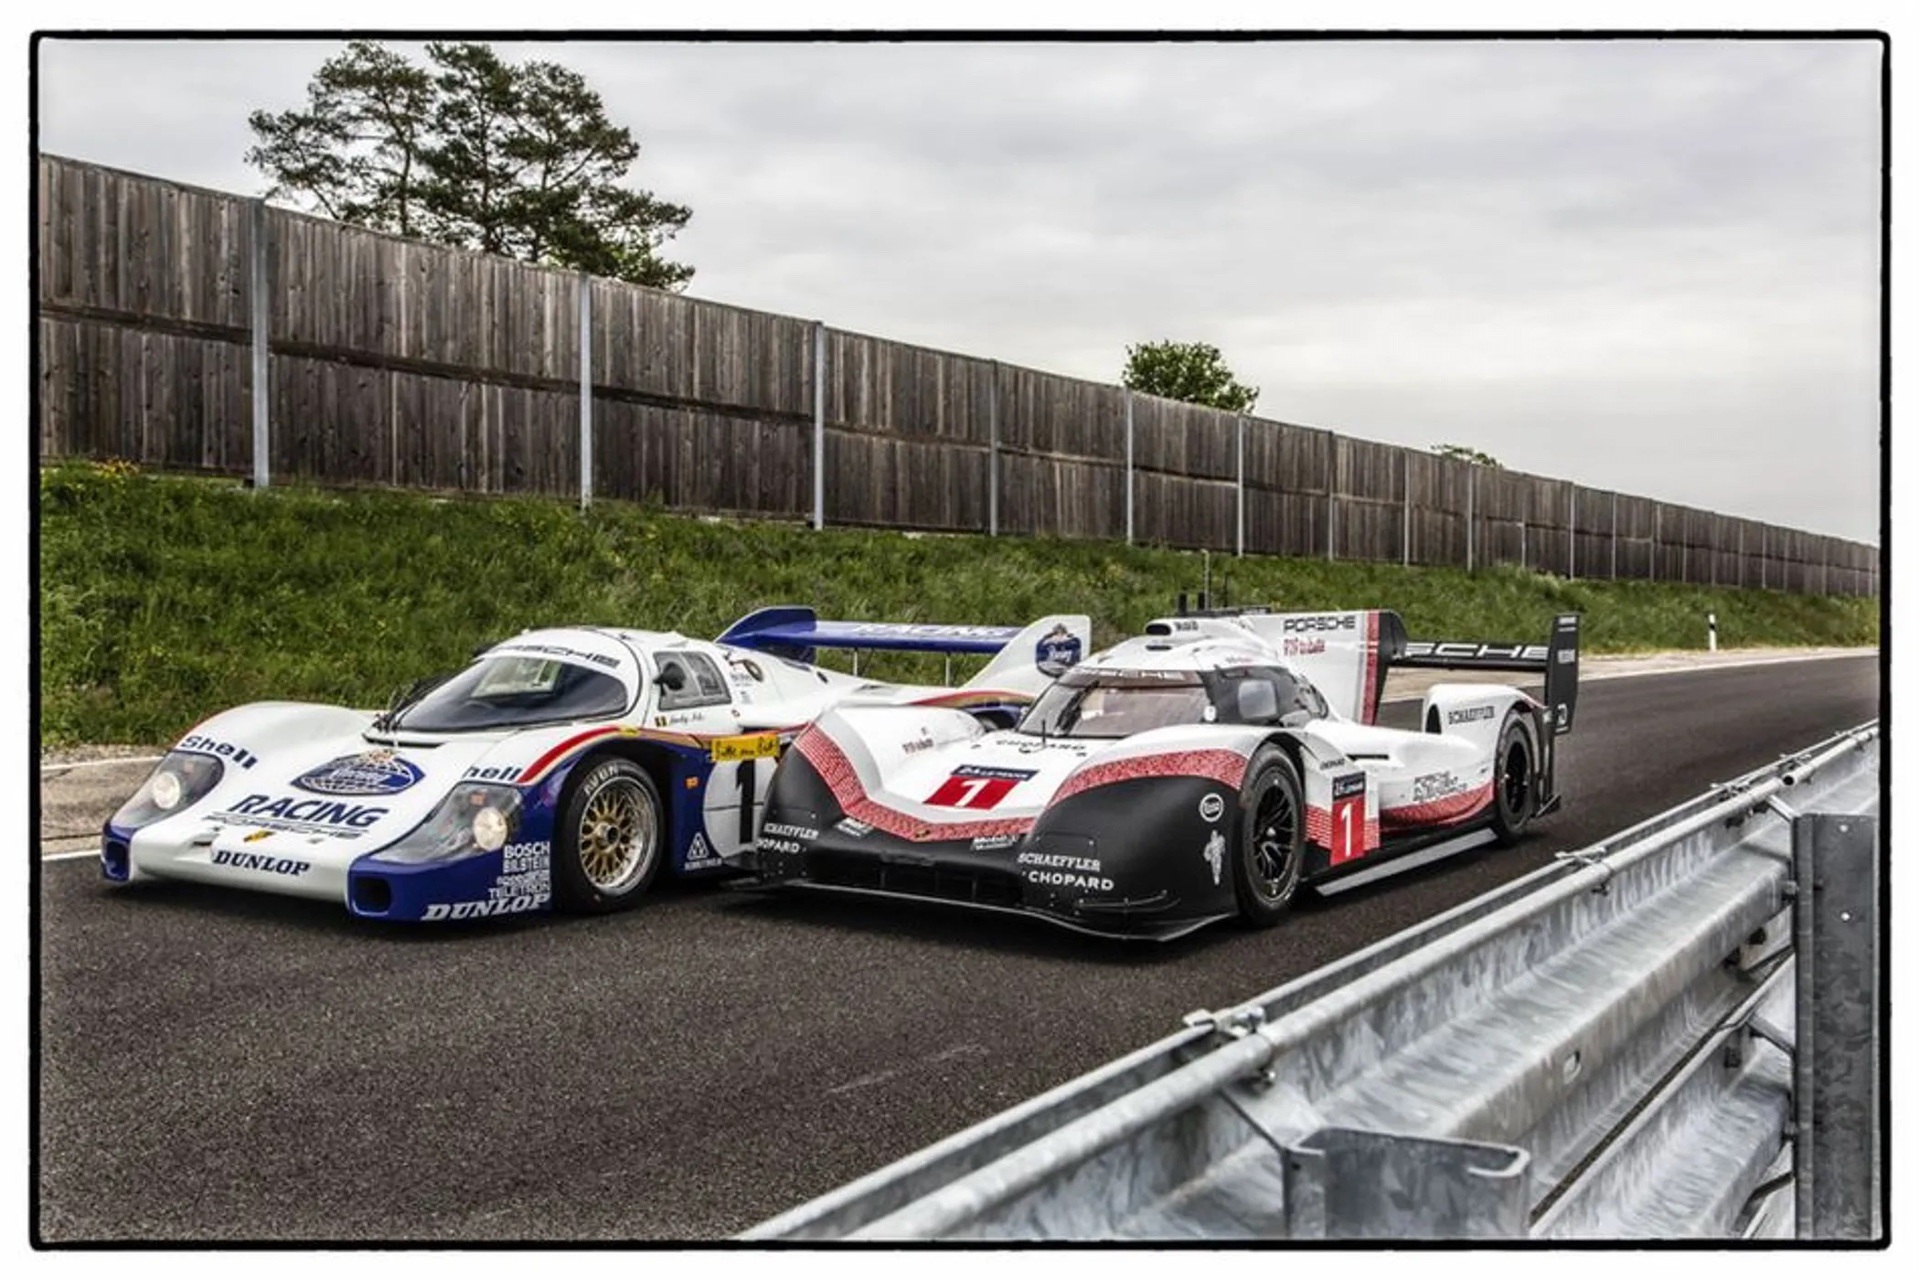 Side by side view of a Porsche 956 and a Porsche 919